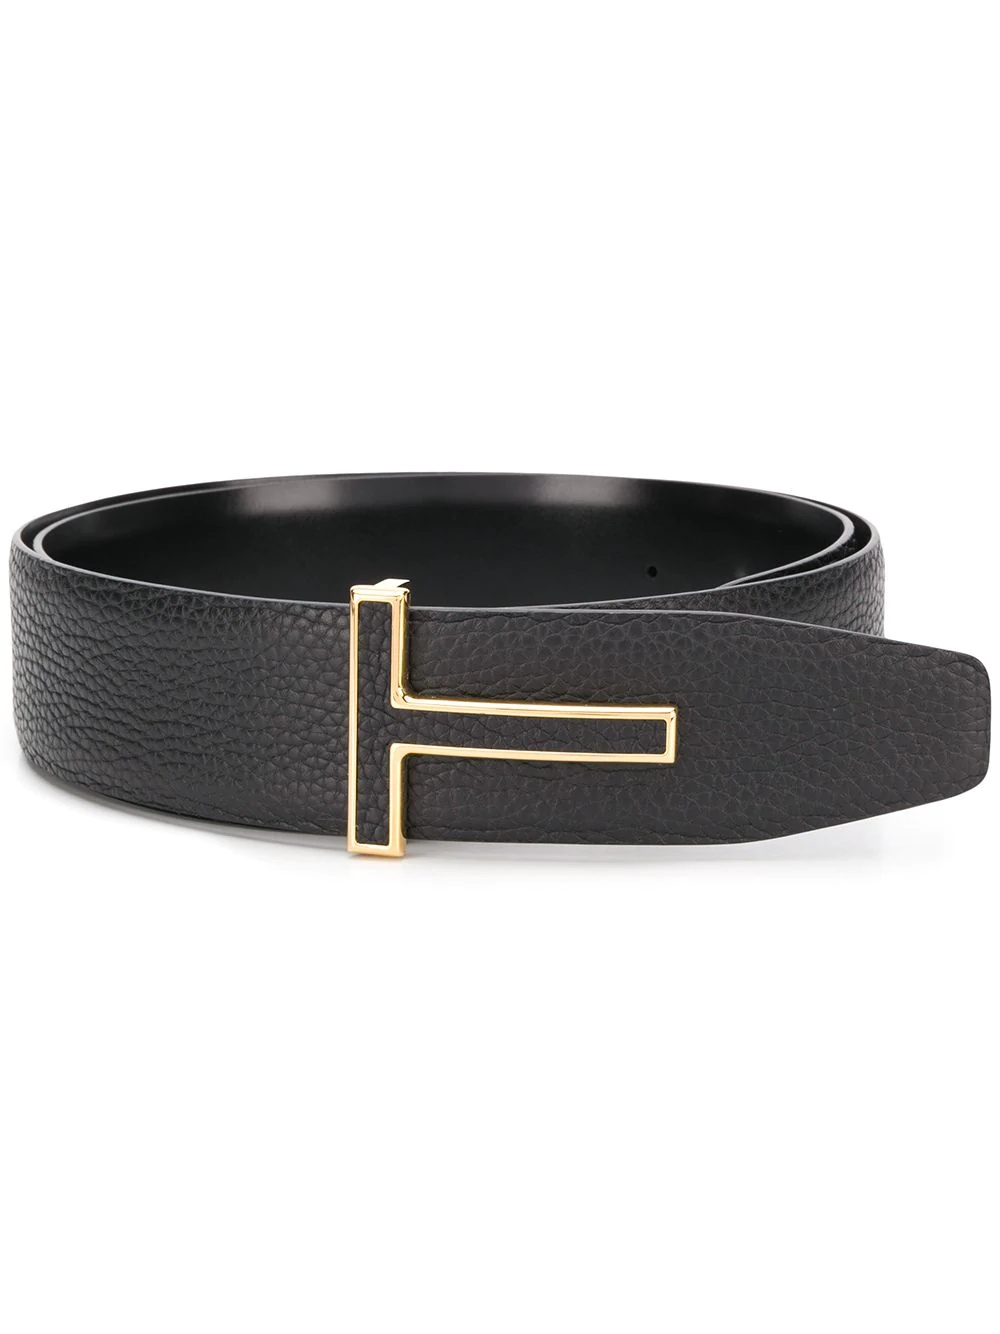 T buckle leather belt - 1